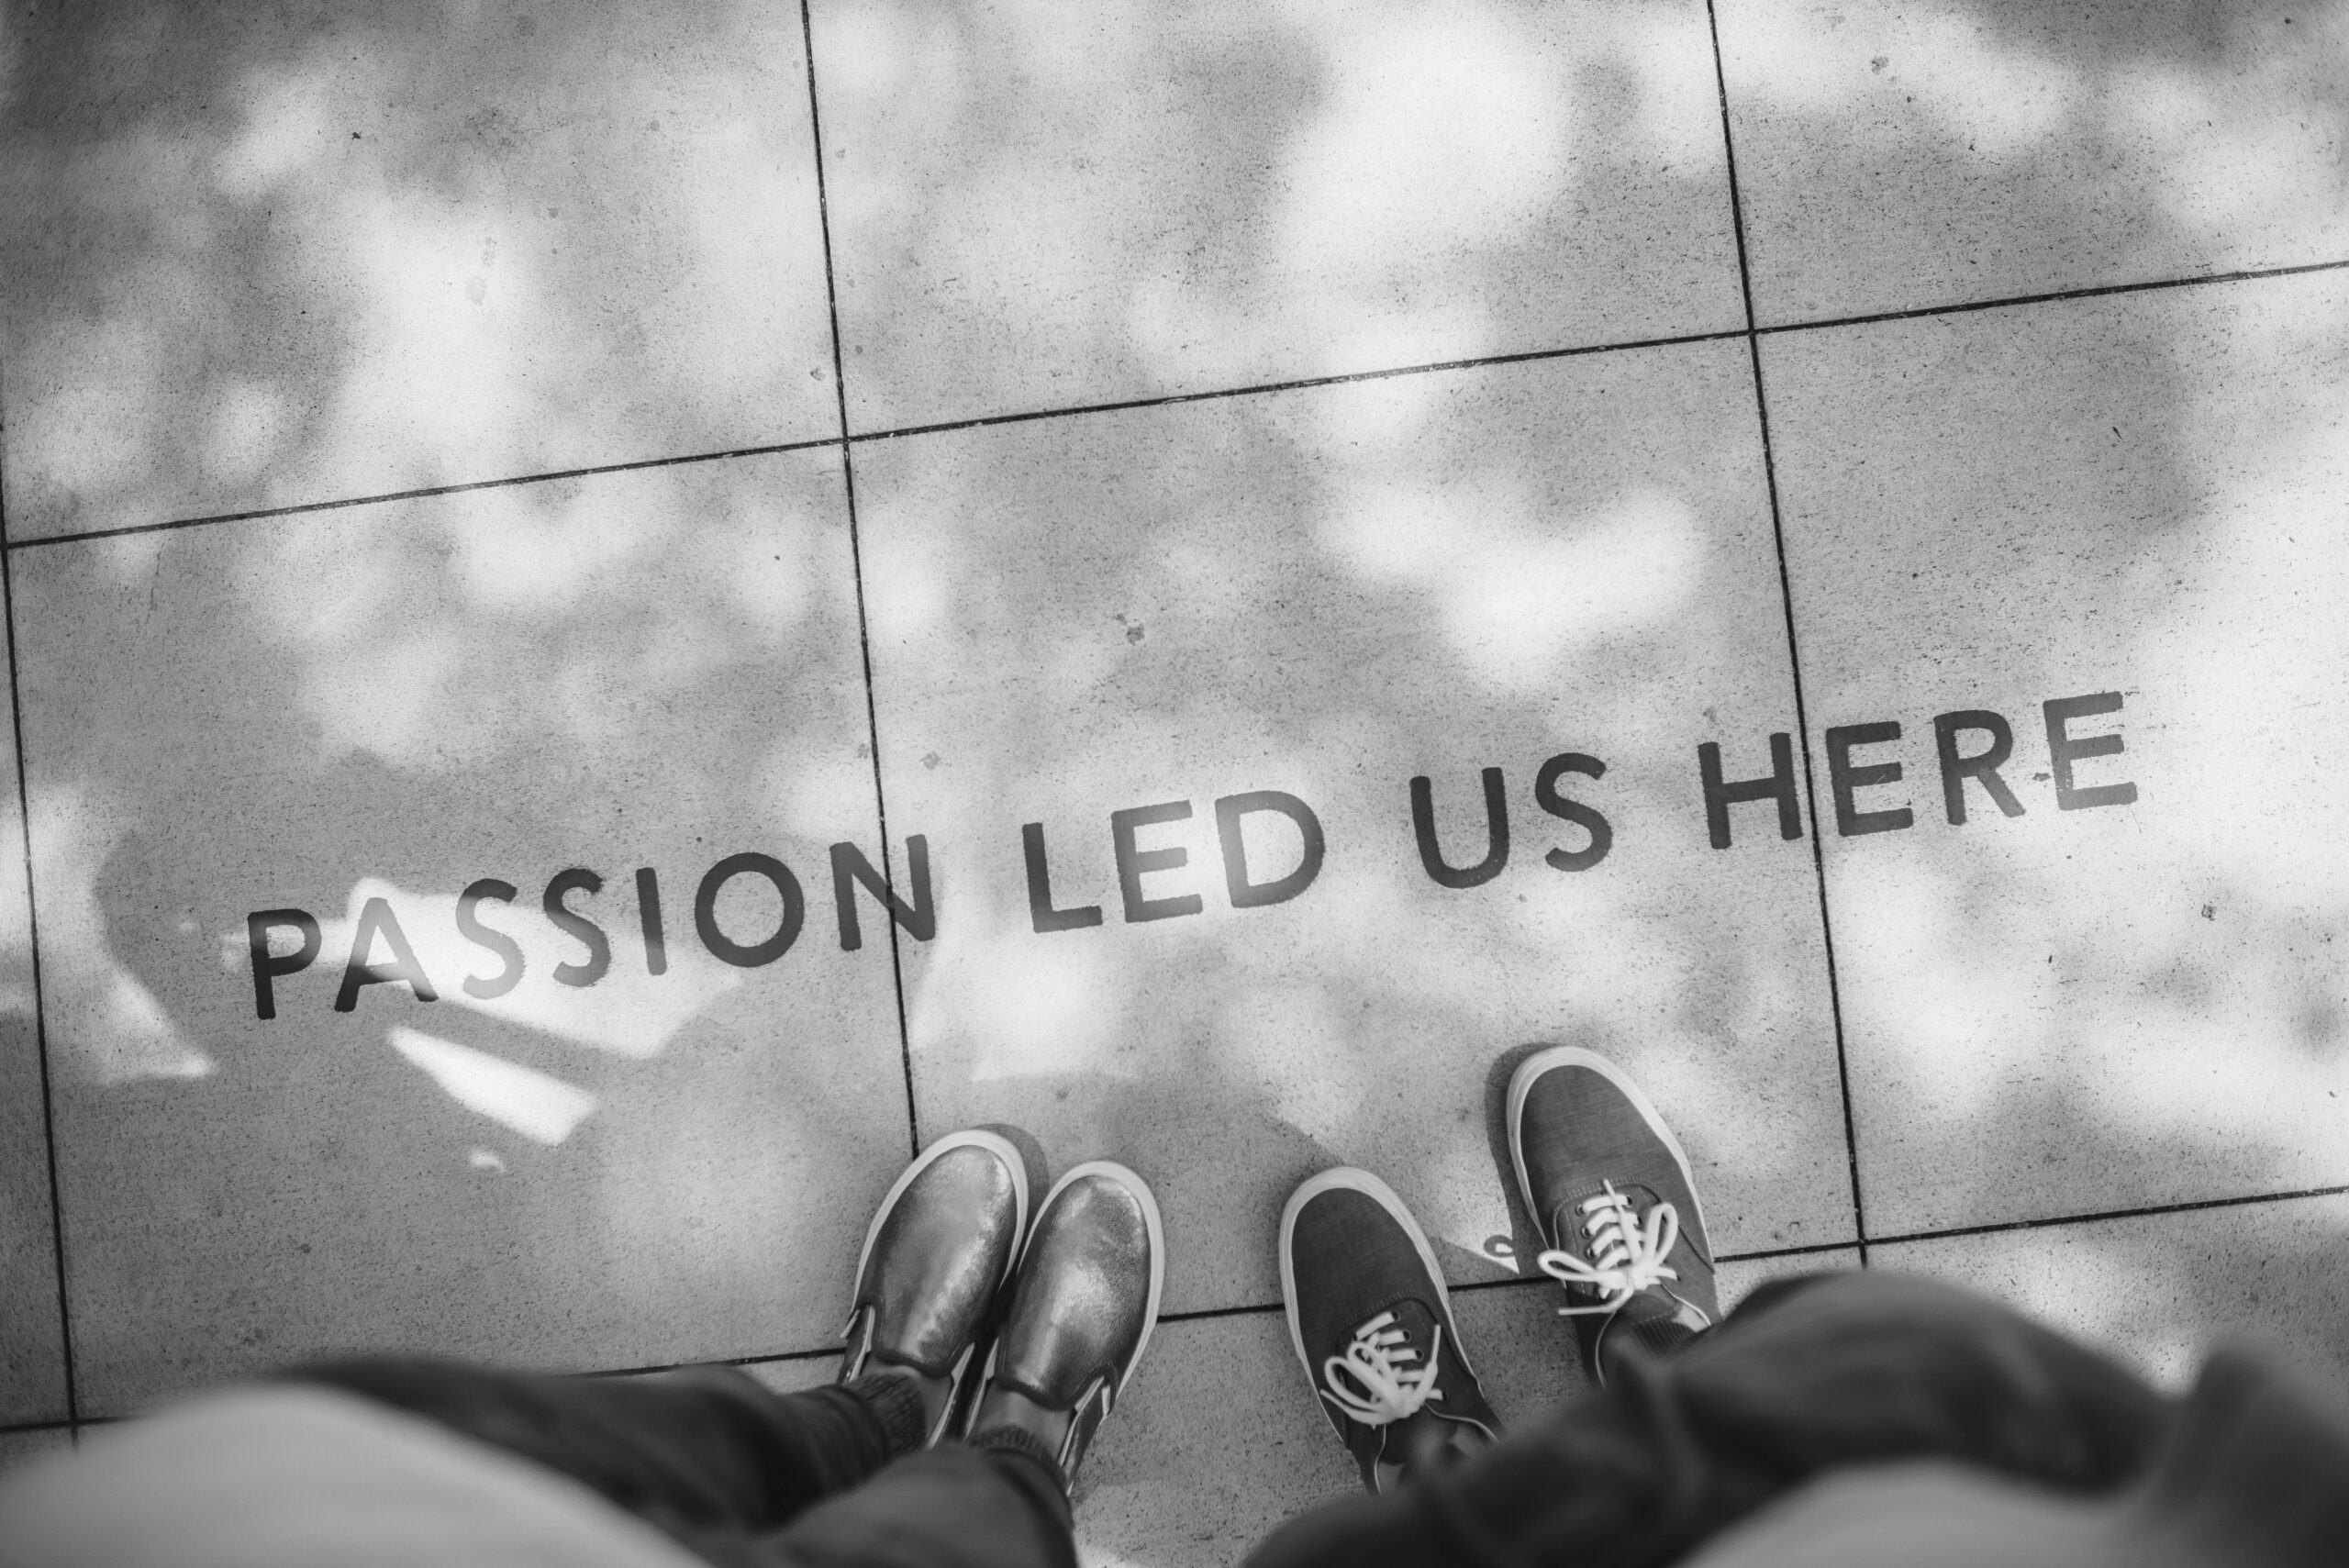 two sets of feet on the street with a quote infront of the feet that says "Passion led us hear"